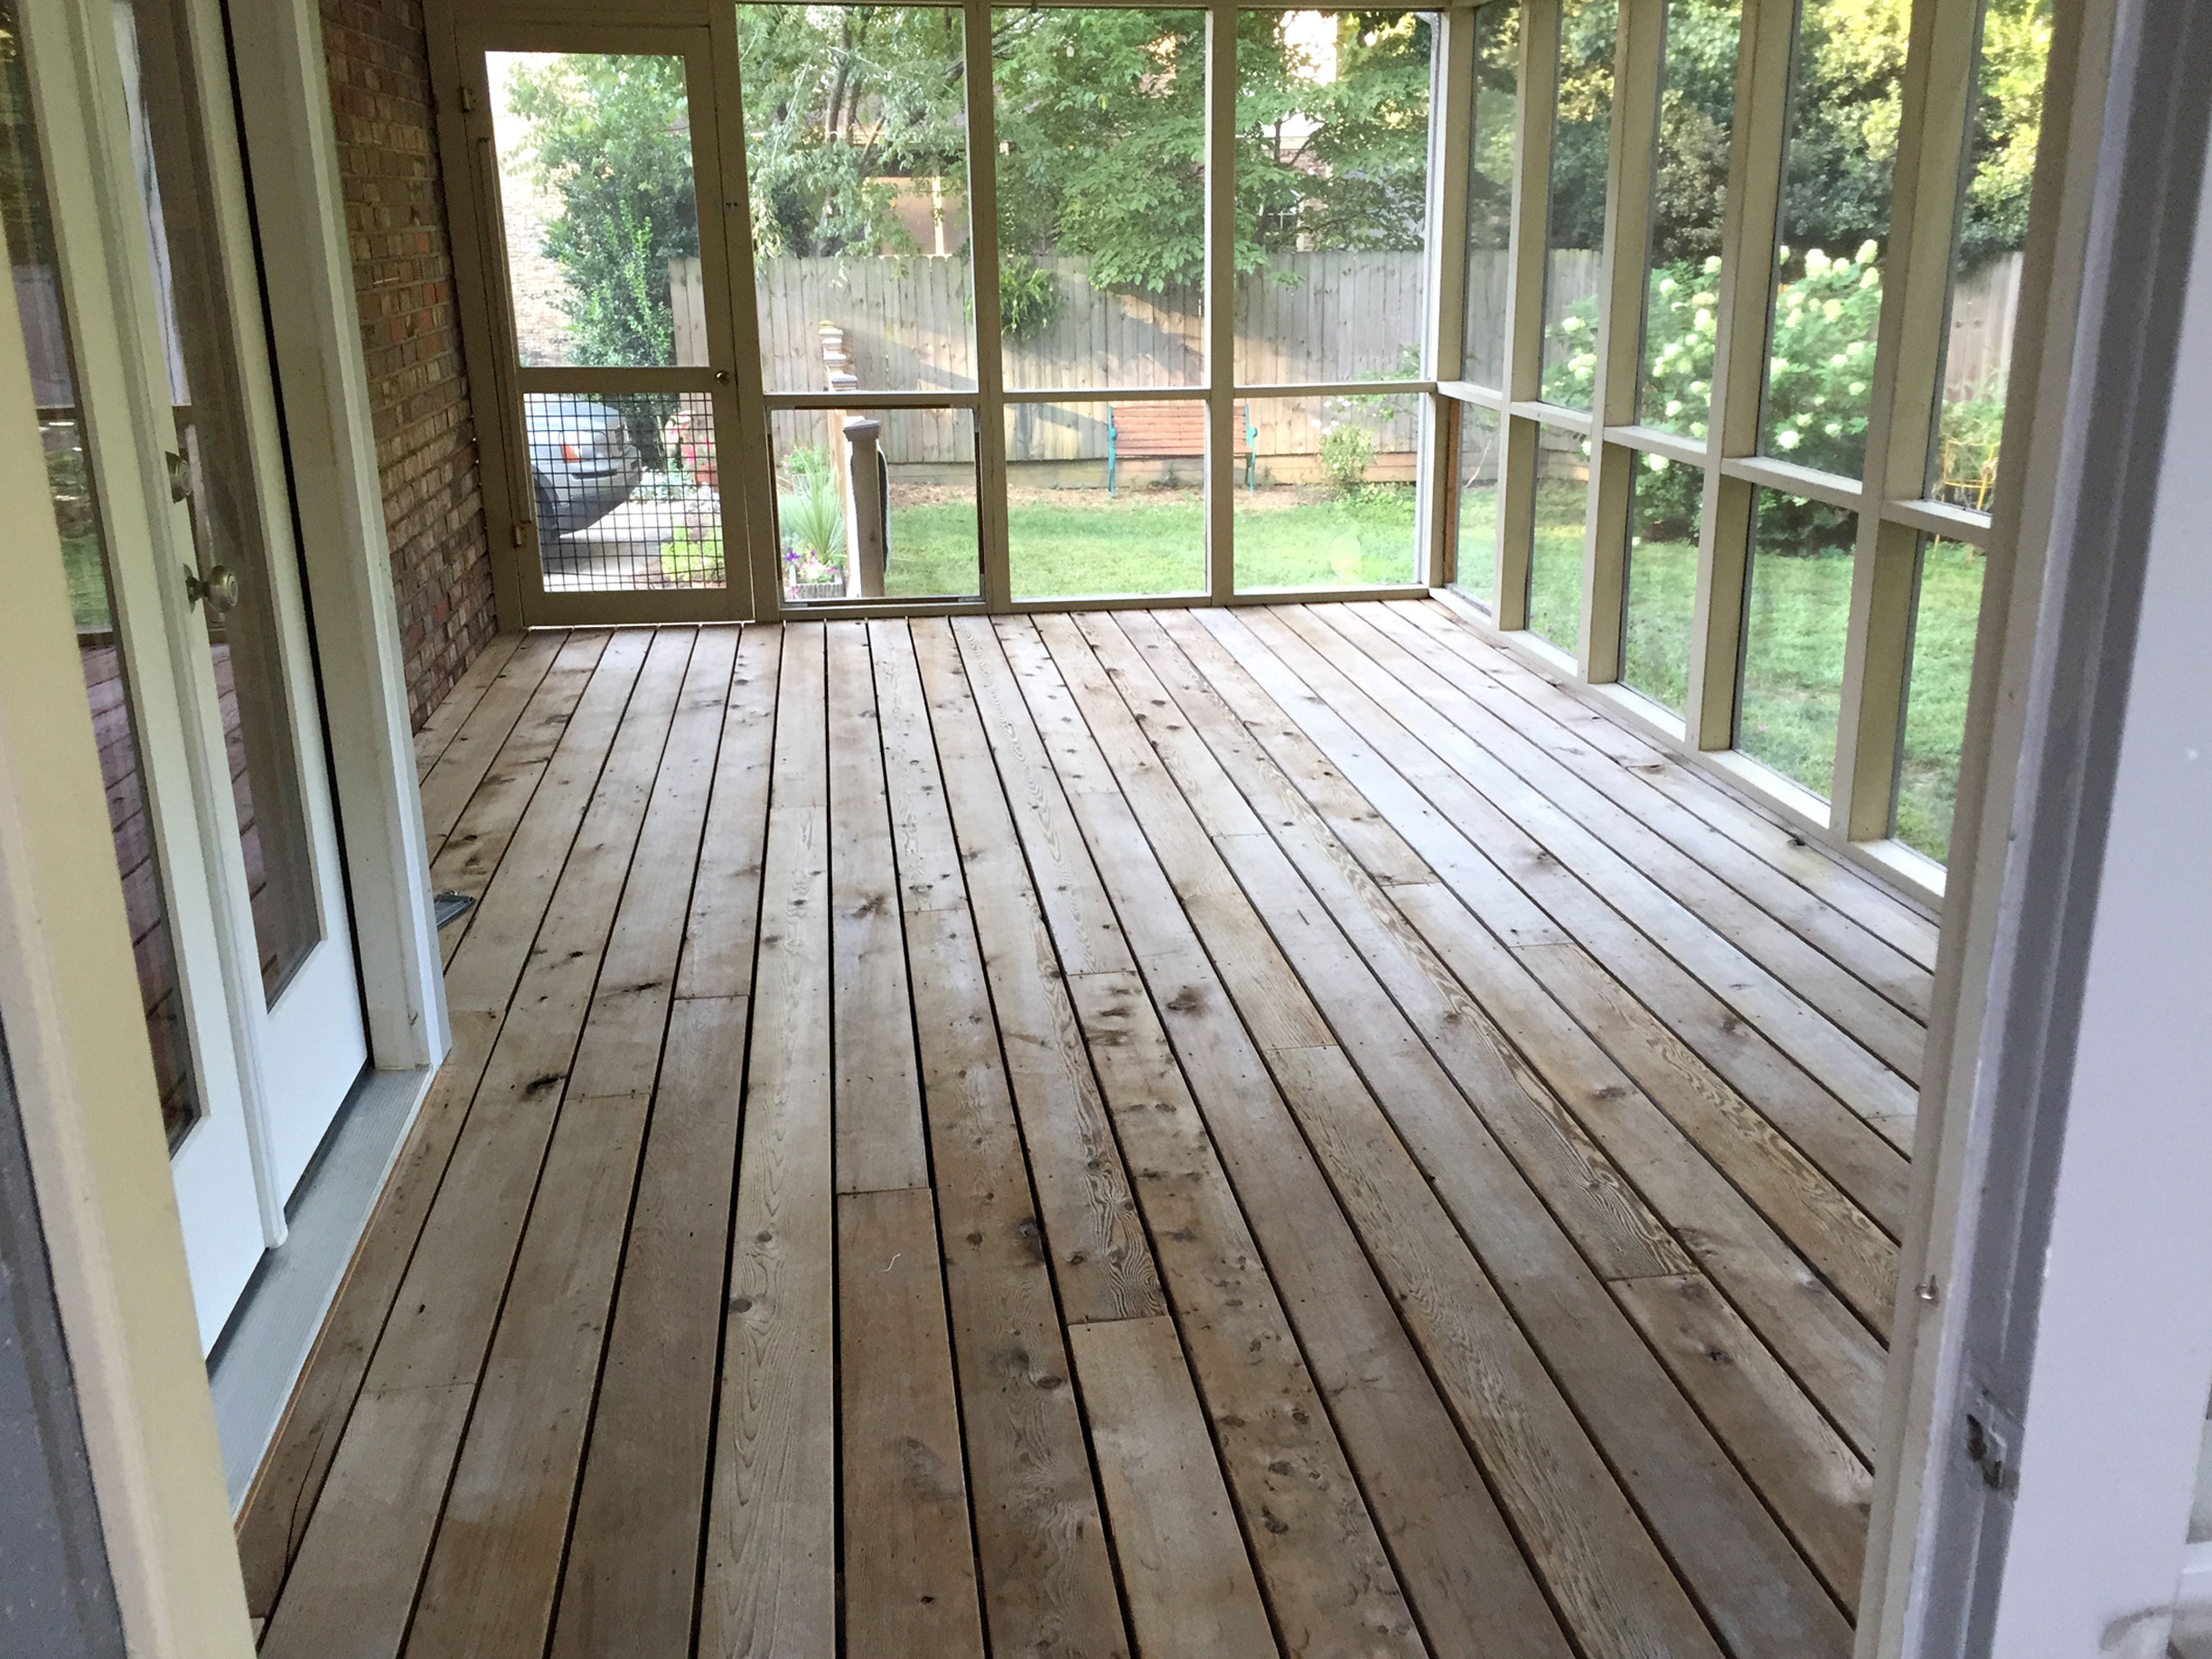 How To Prepare And Paint A Screened Porch Floor The Emerging Home